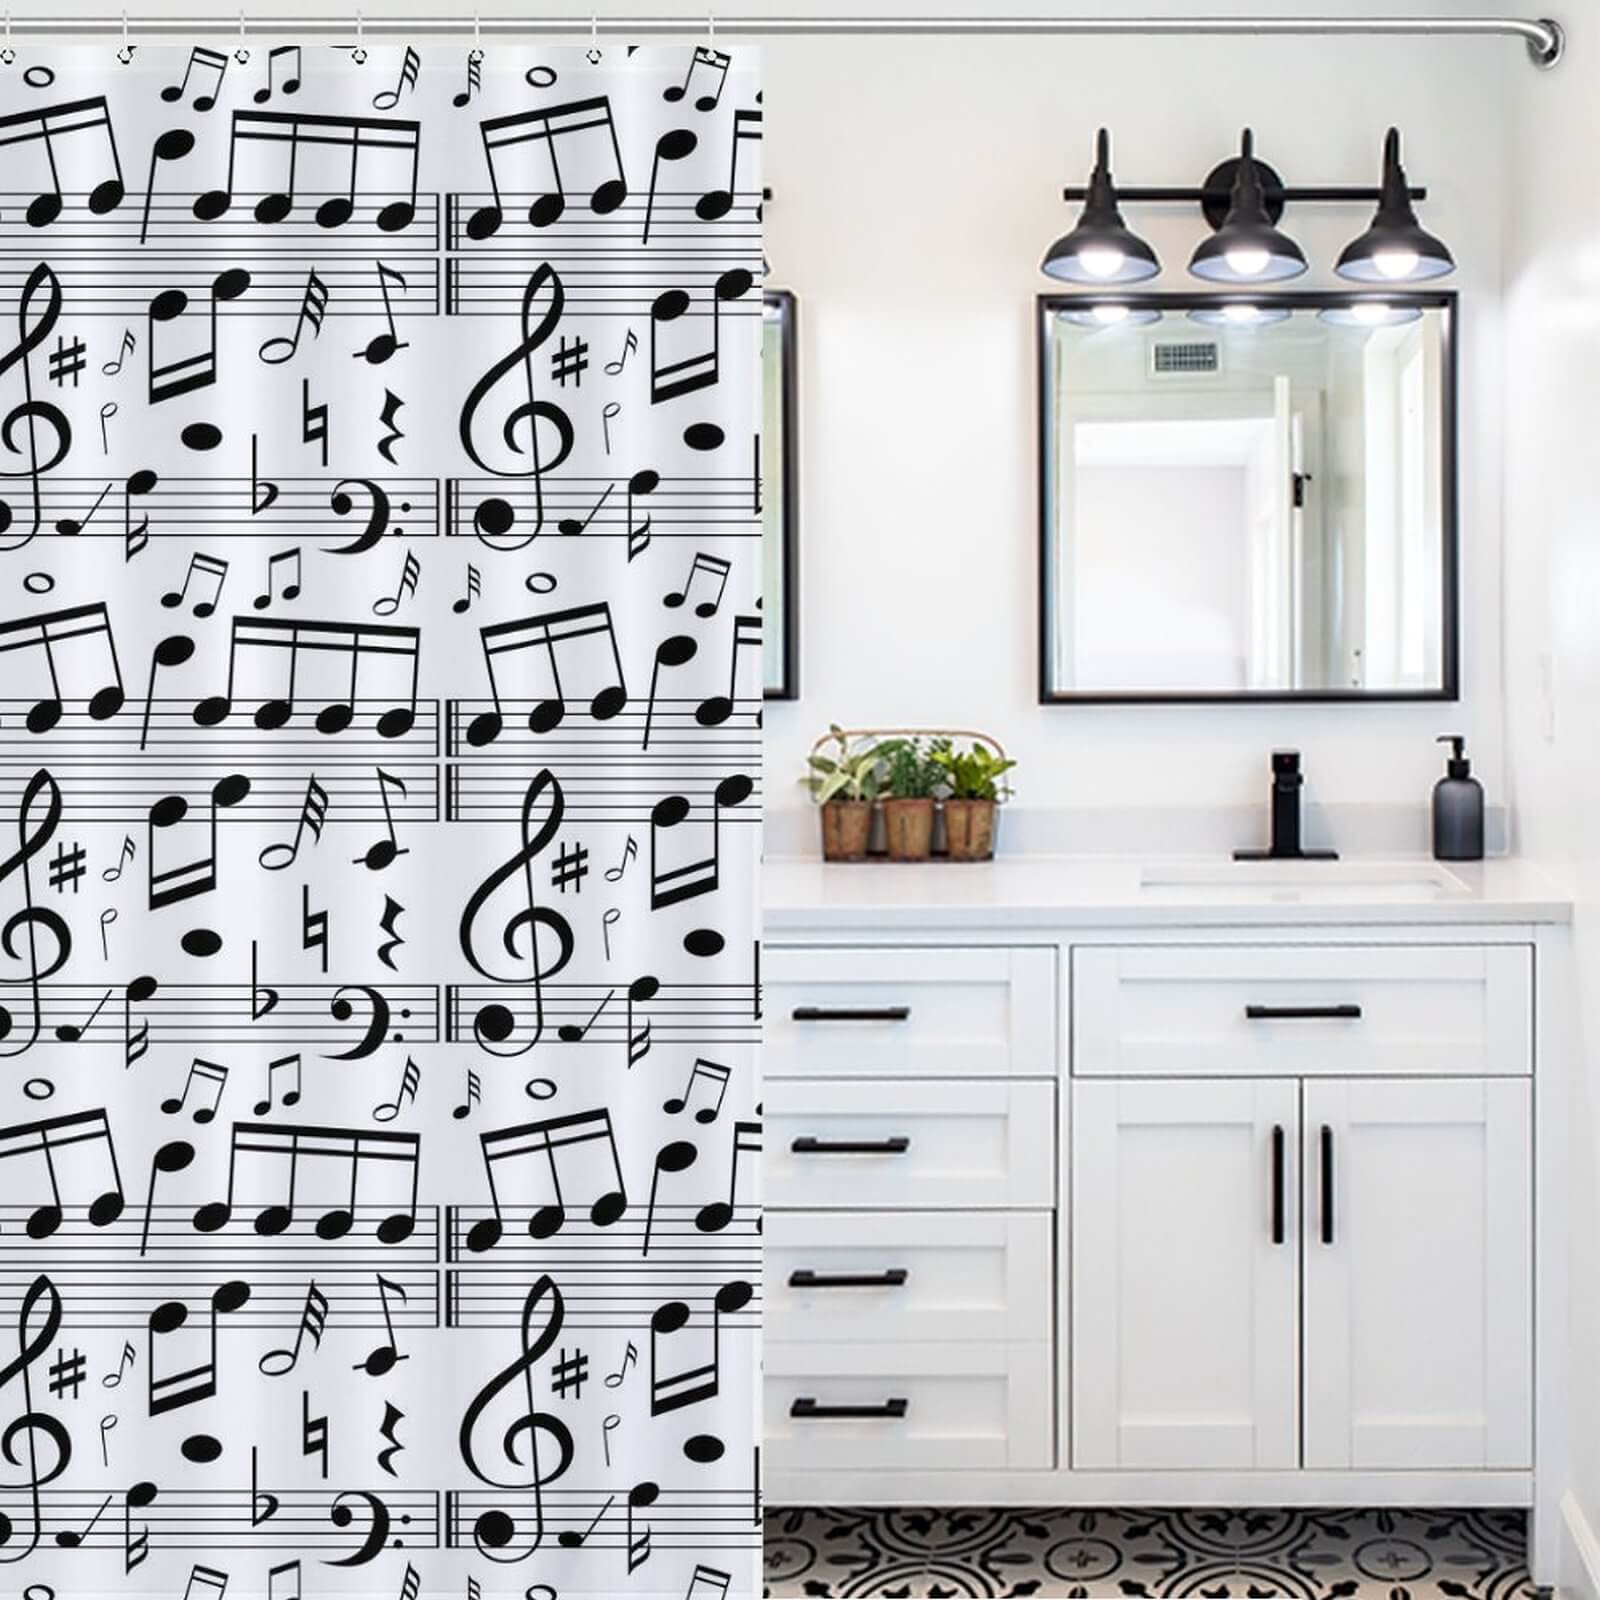 Transform your bathroom decor with a vibrant Cotton Cat shower curtain adorned in beautiful music notes.